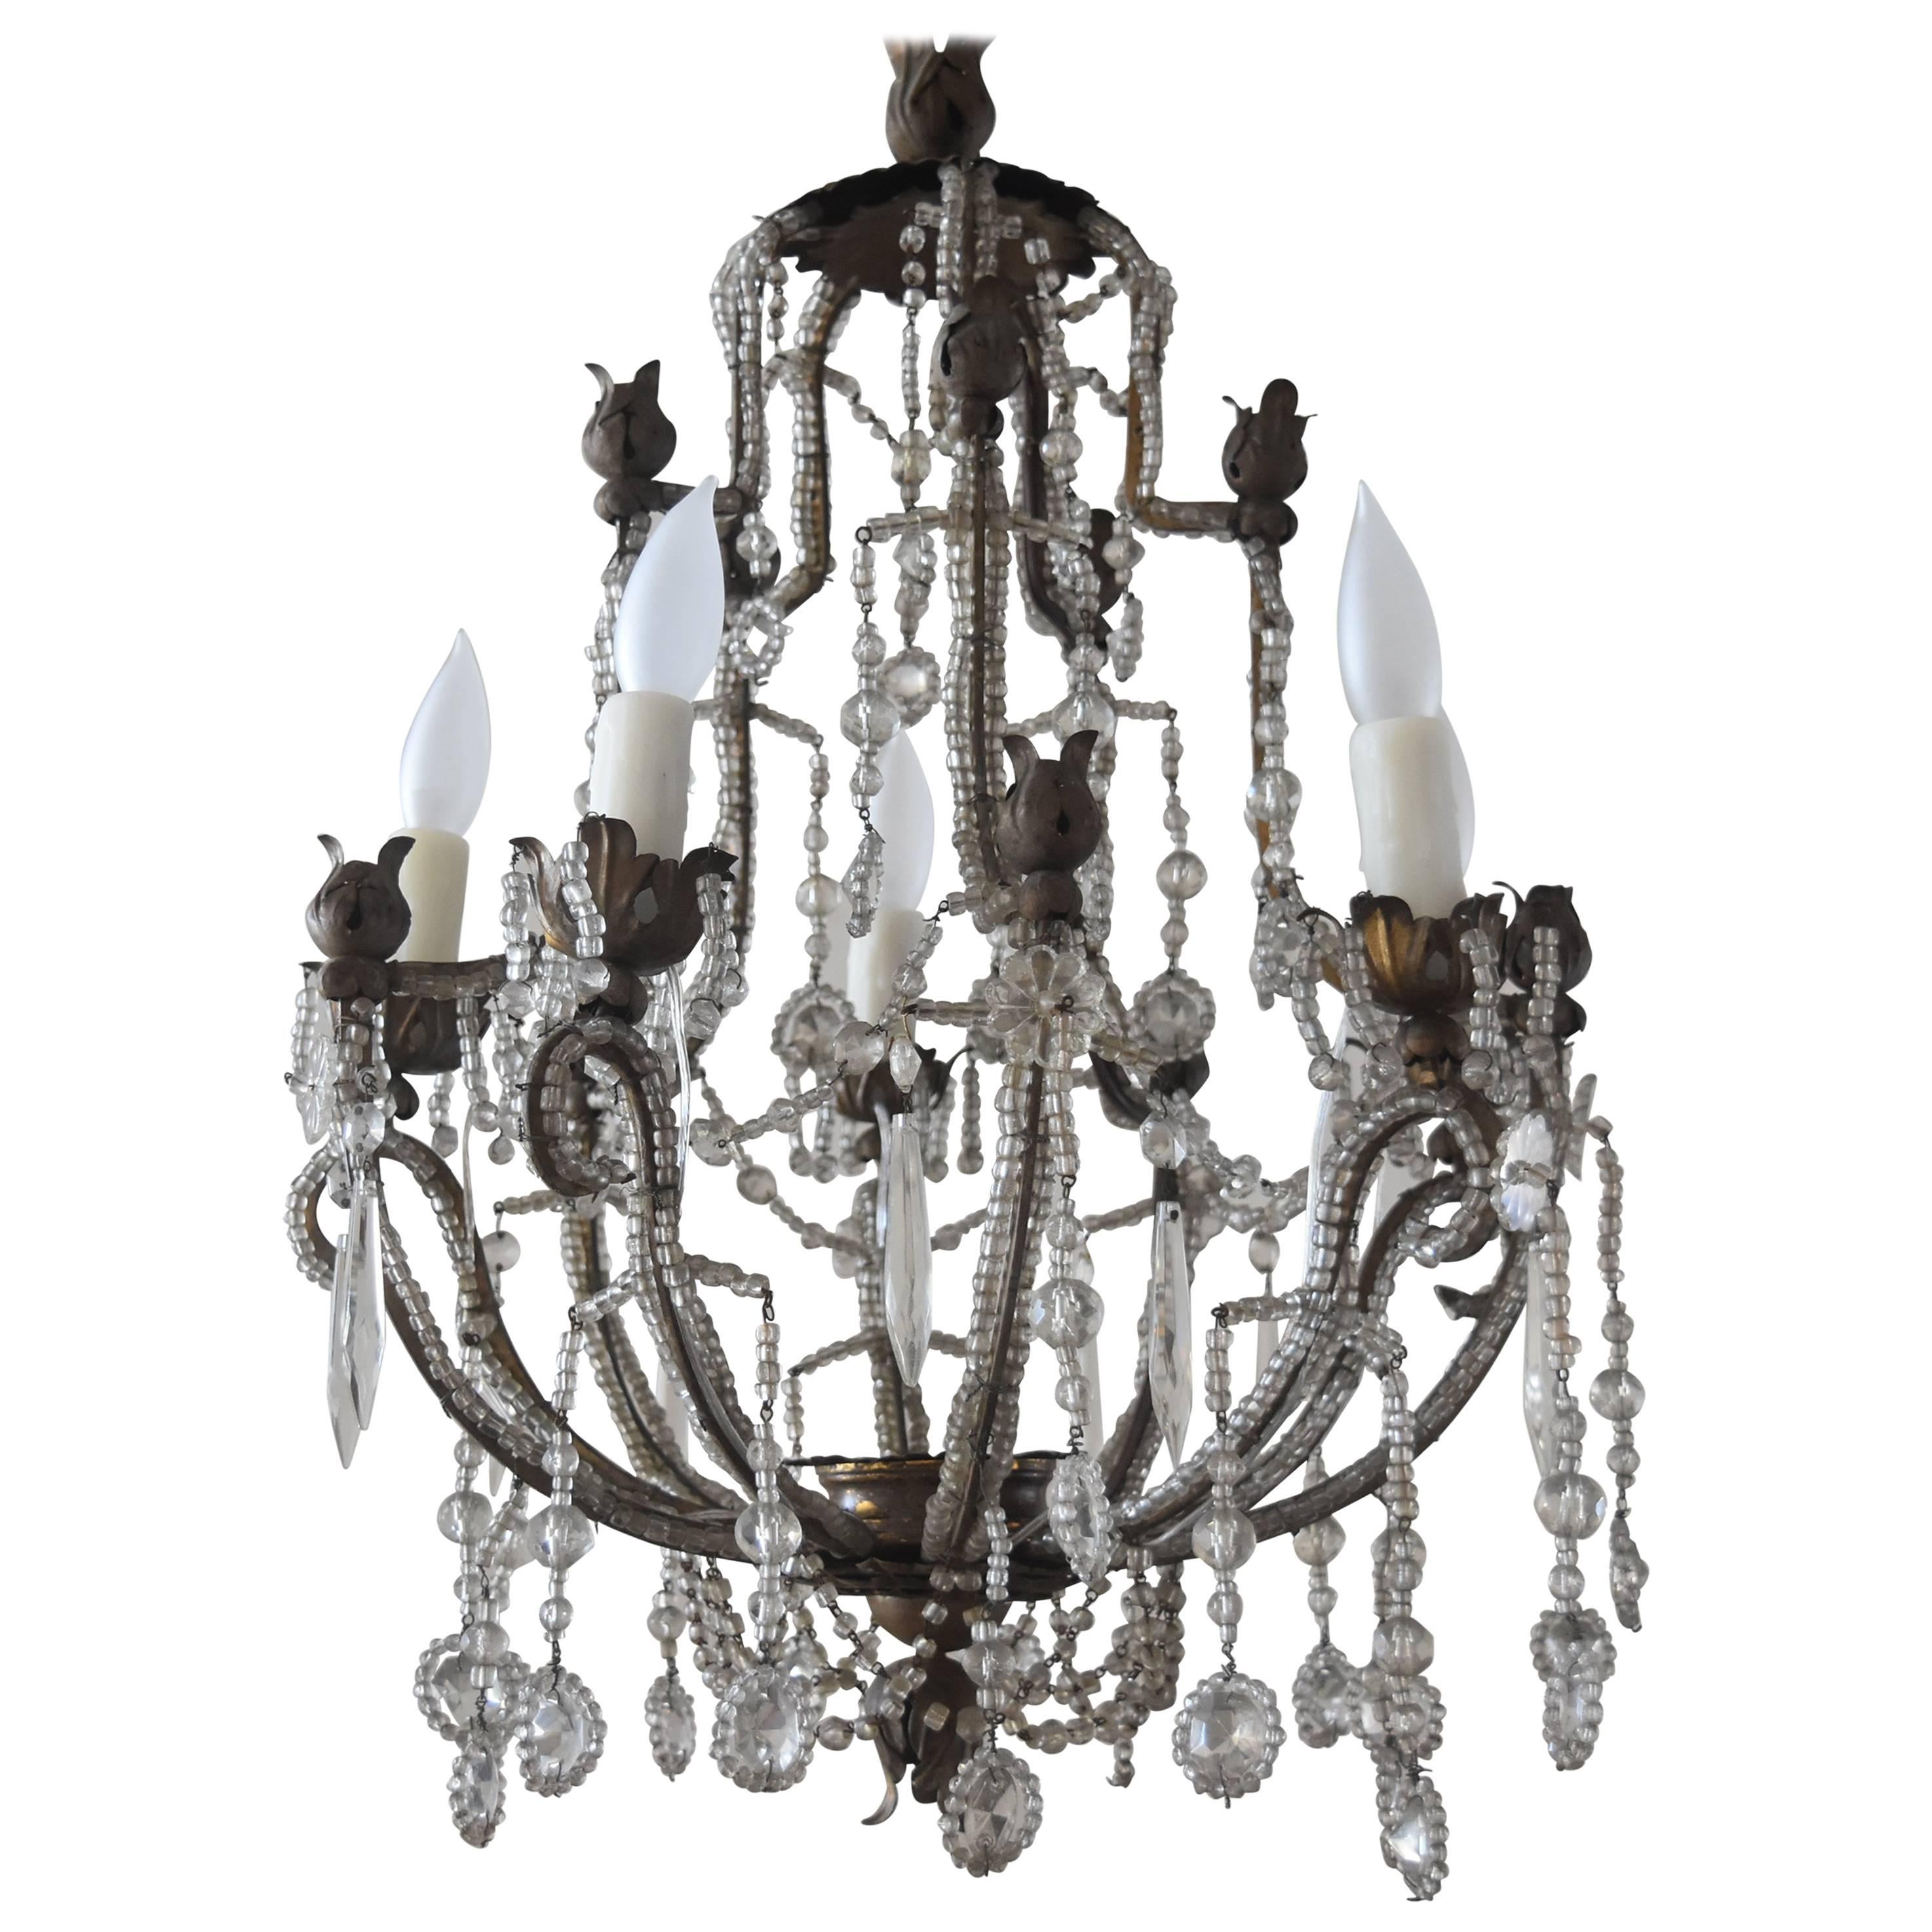 19th Century Italian Beaded Metal Crystal Chandelier with Floral Metal Bobeshes